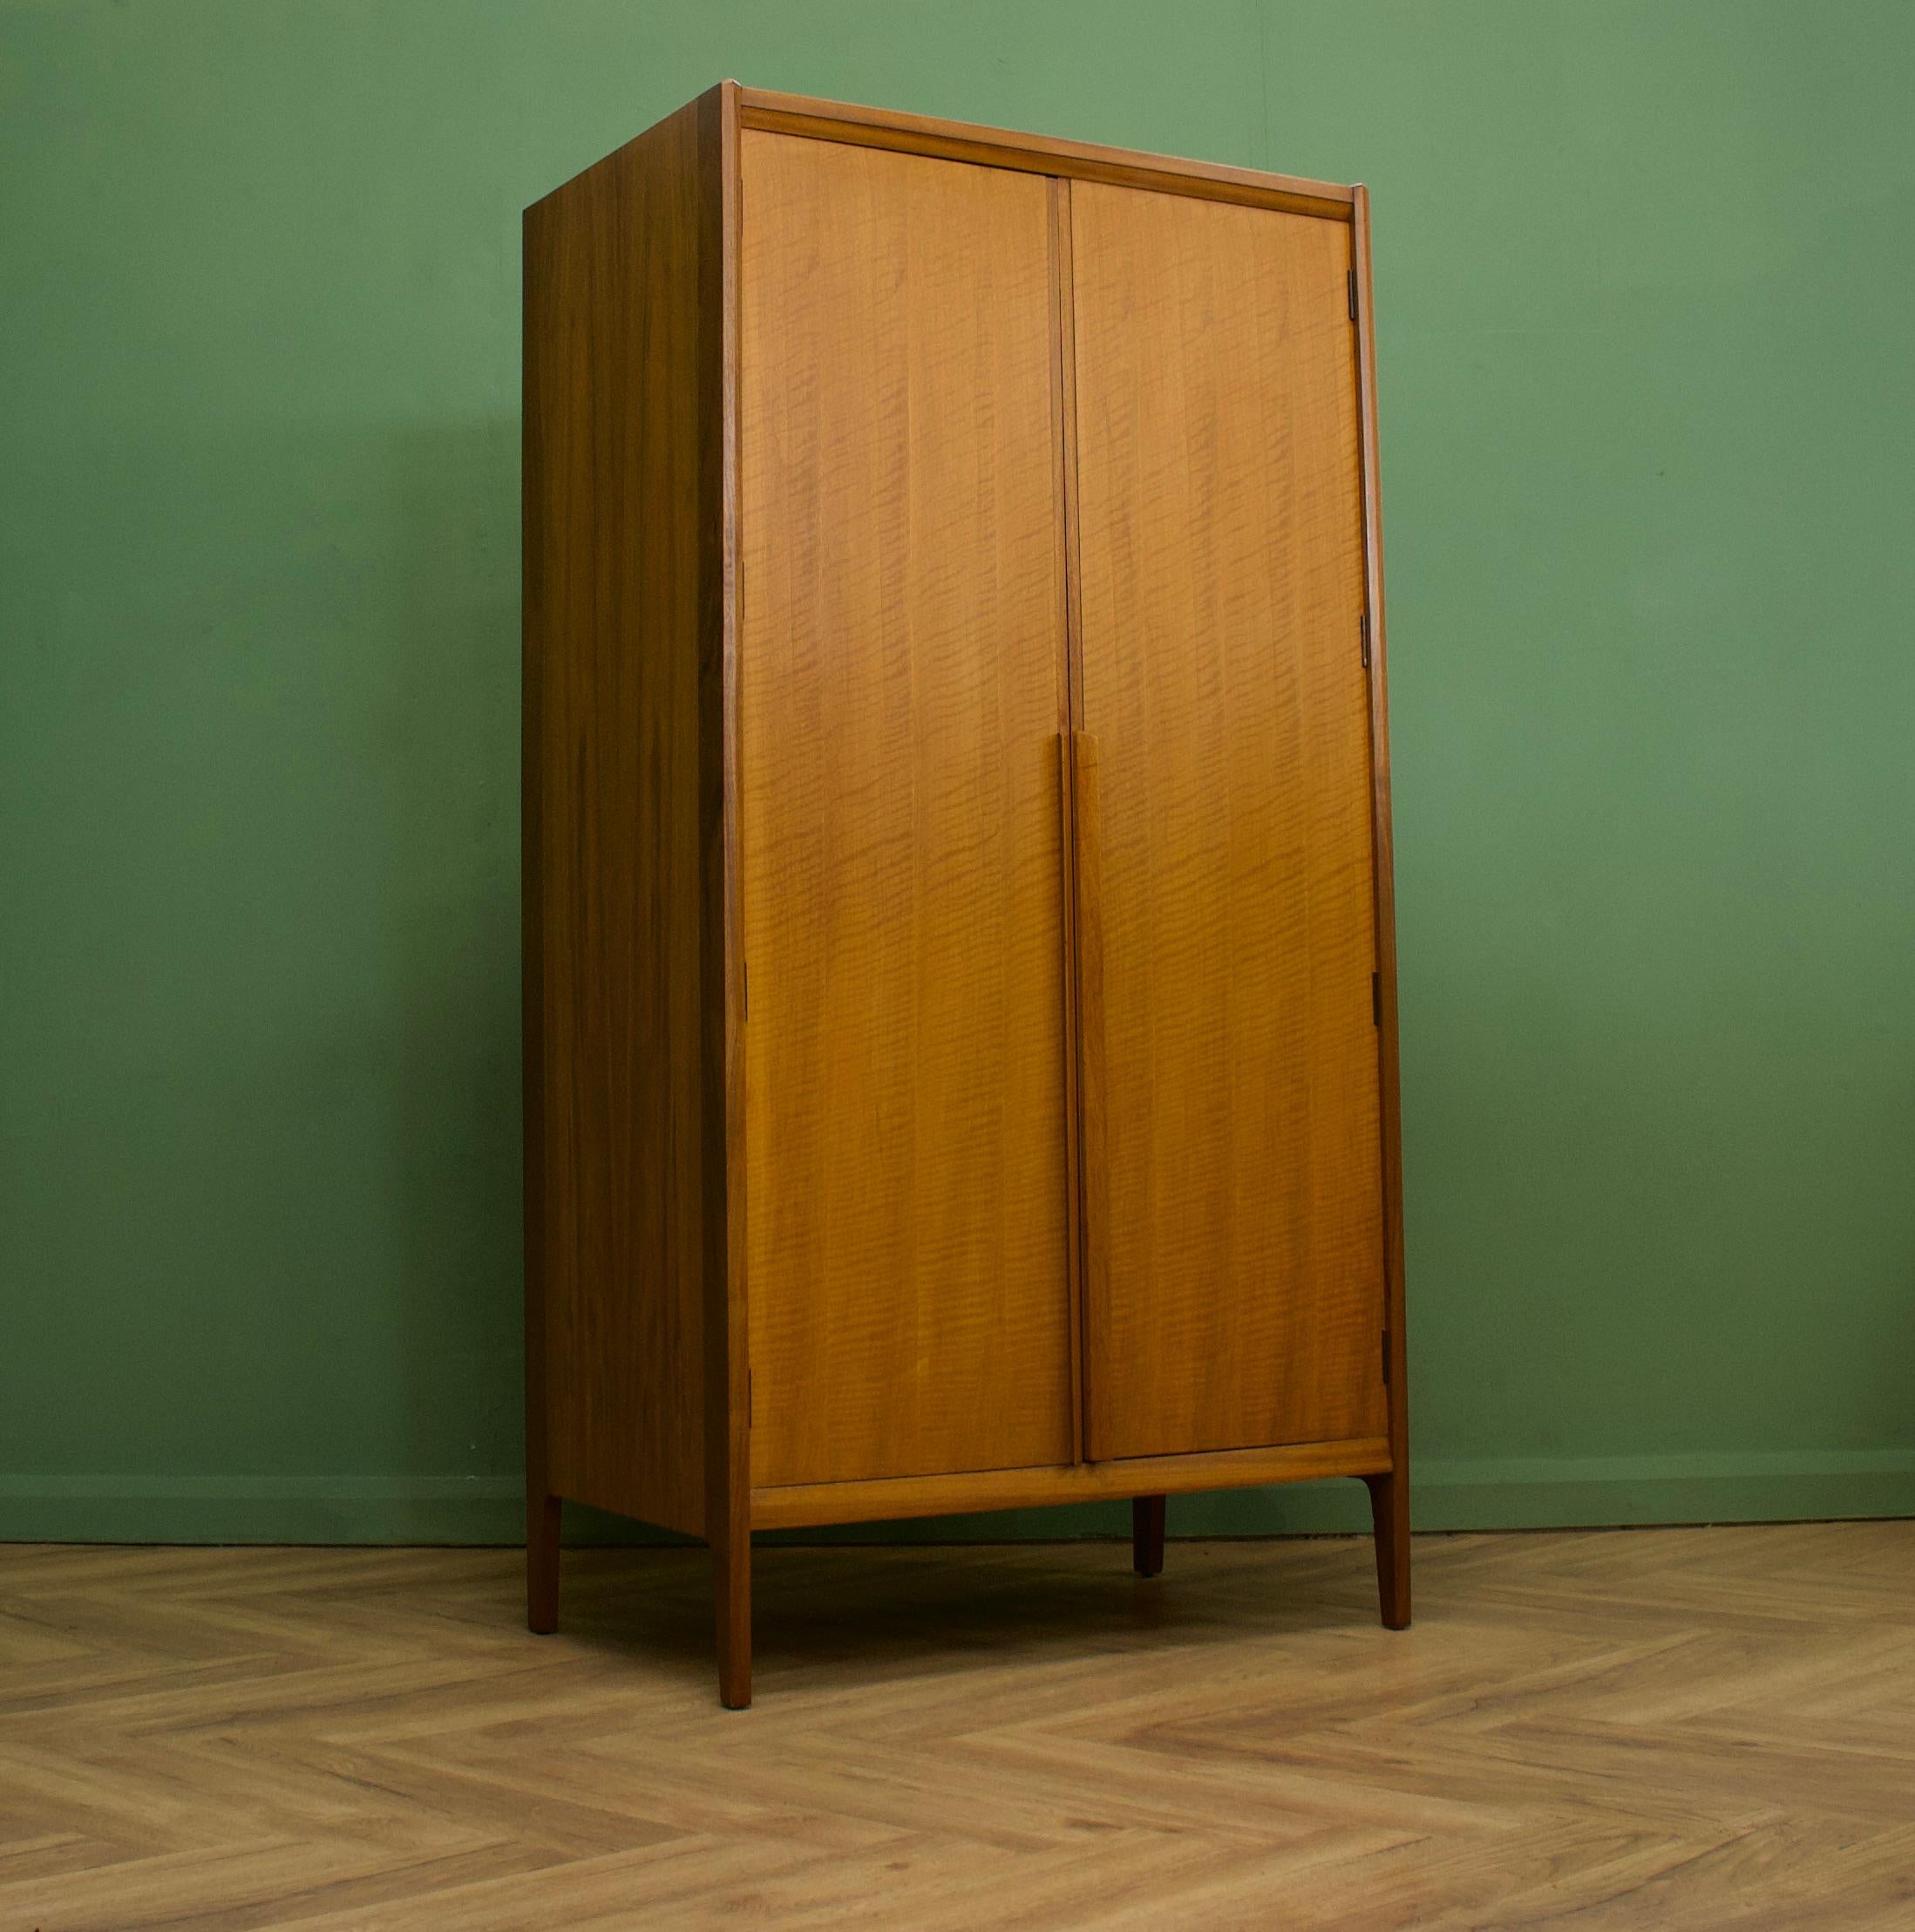 A freestanding double door walnut & teak wardrobe from Younger-  in the Danish modern style
Made during the 1960s


Fitted out with a clothes rail and fixed shelving for ample storage in such a compact piece
The style of this wardrobe is quite